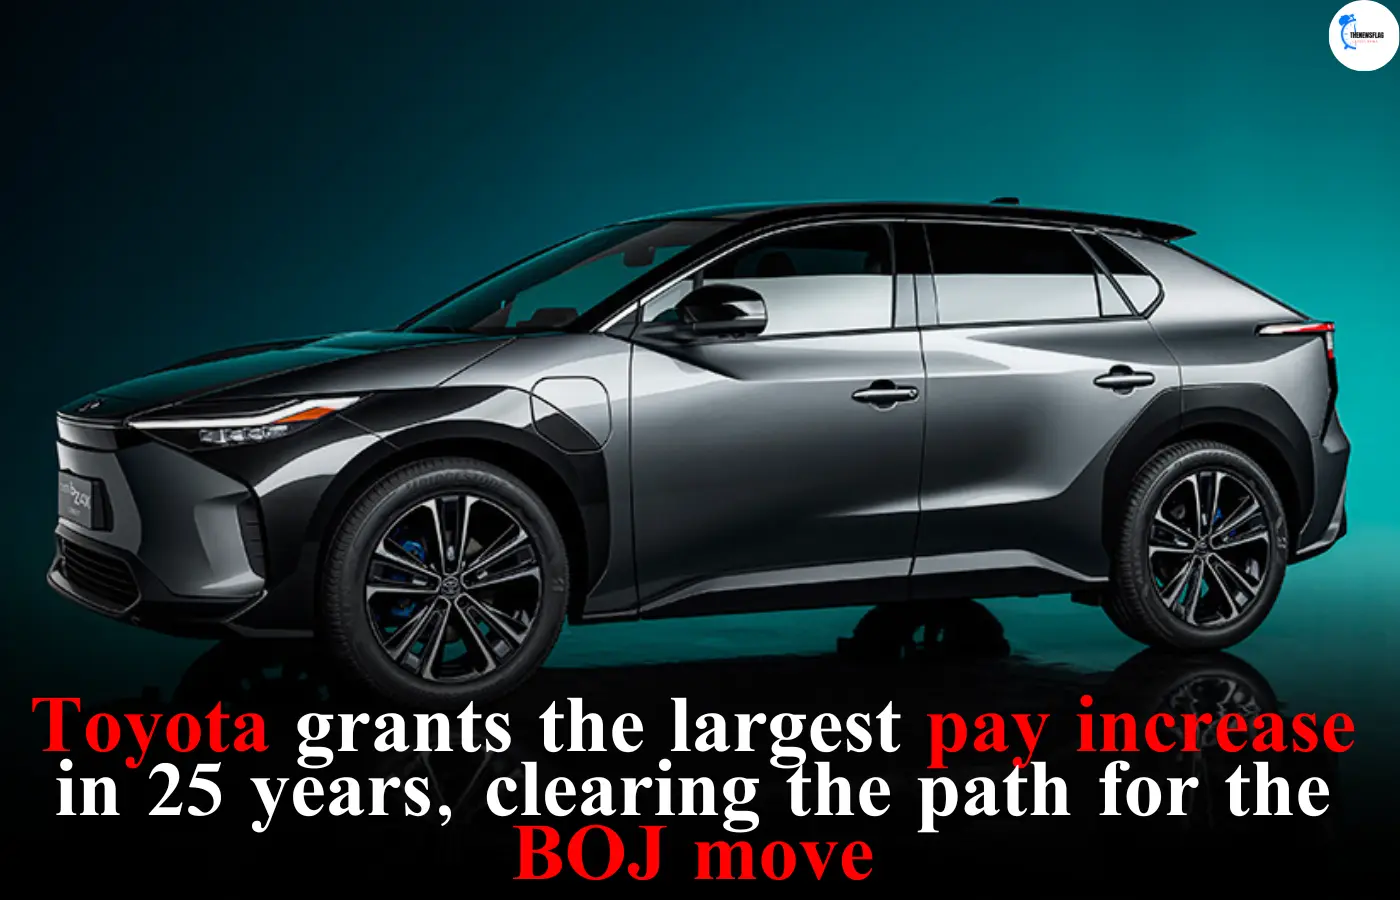 Toyota grants the largest pay increase in 25 years